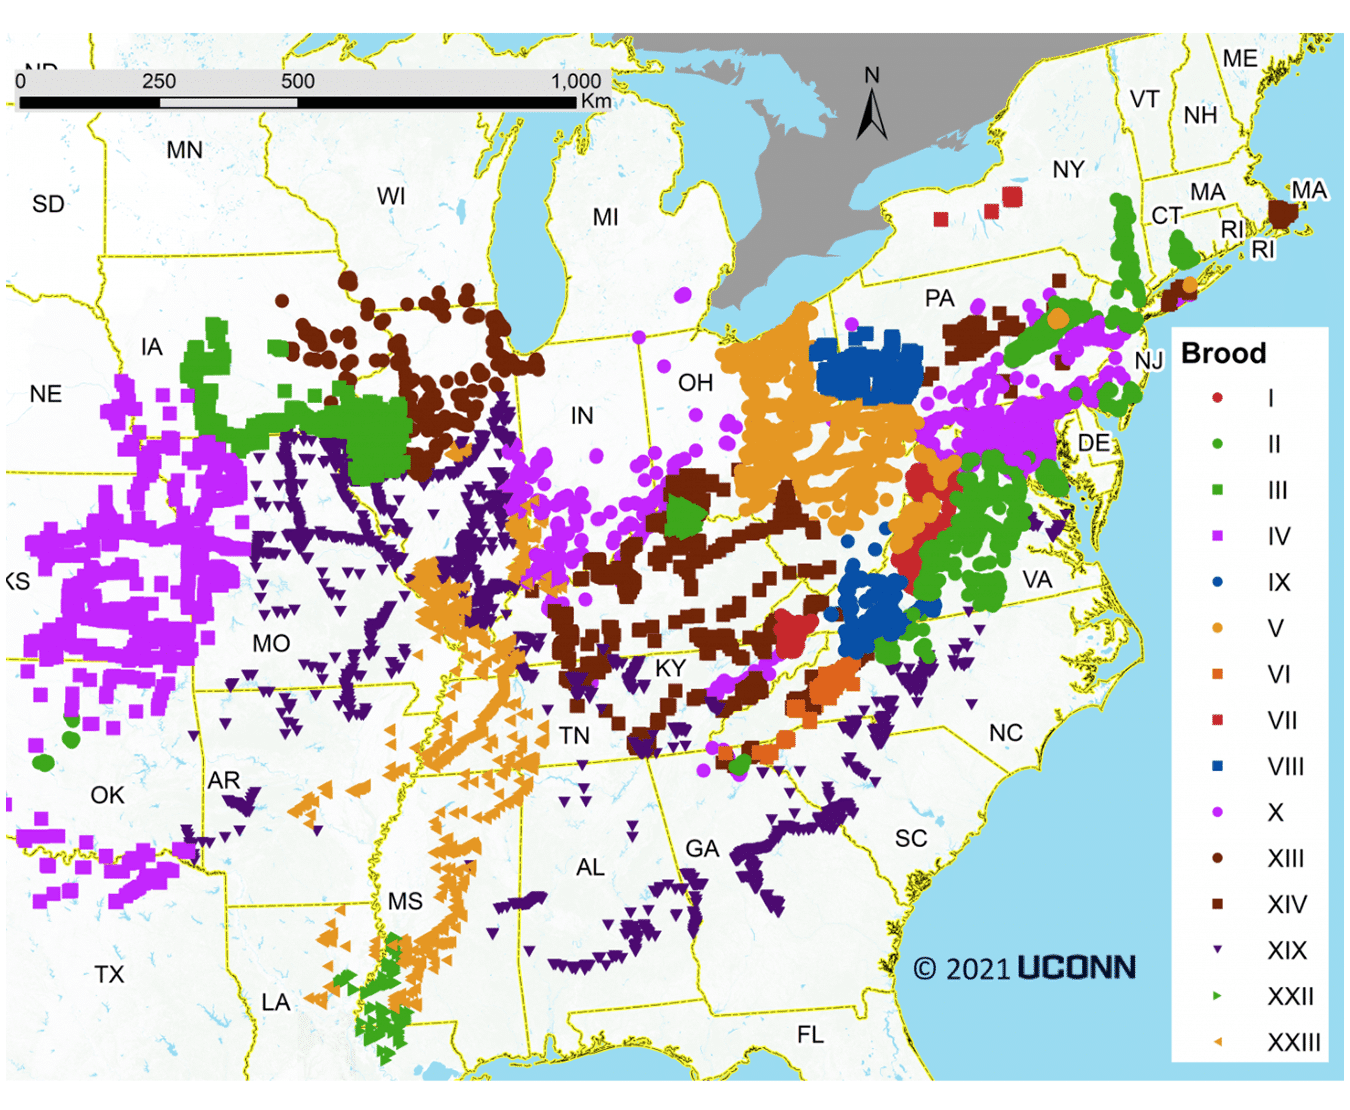 map of periodical cicacda broods in the US